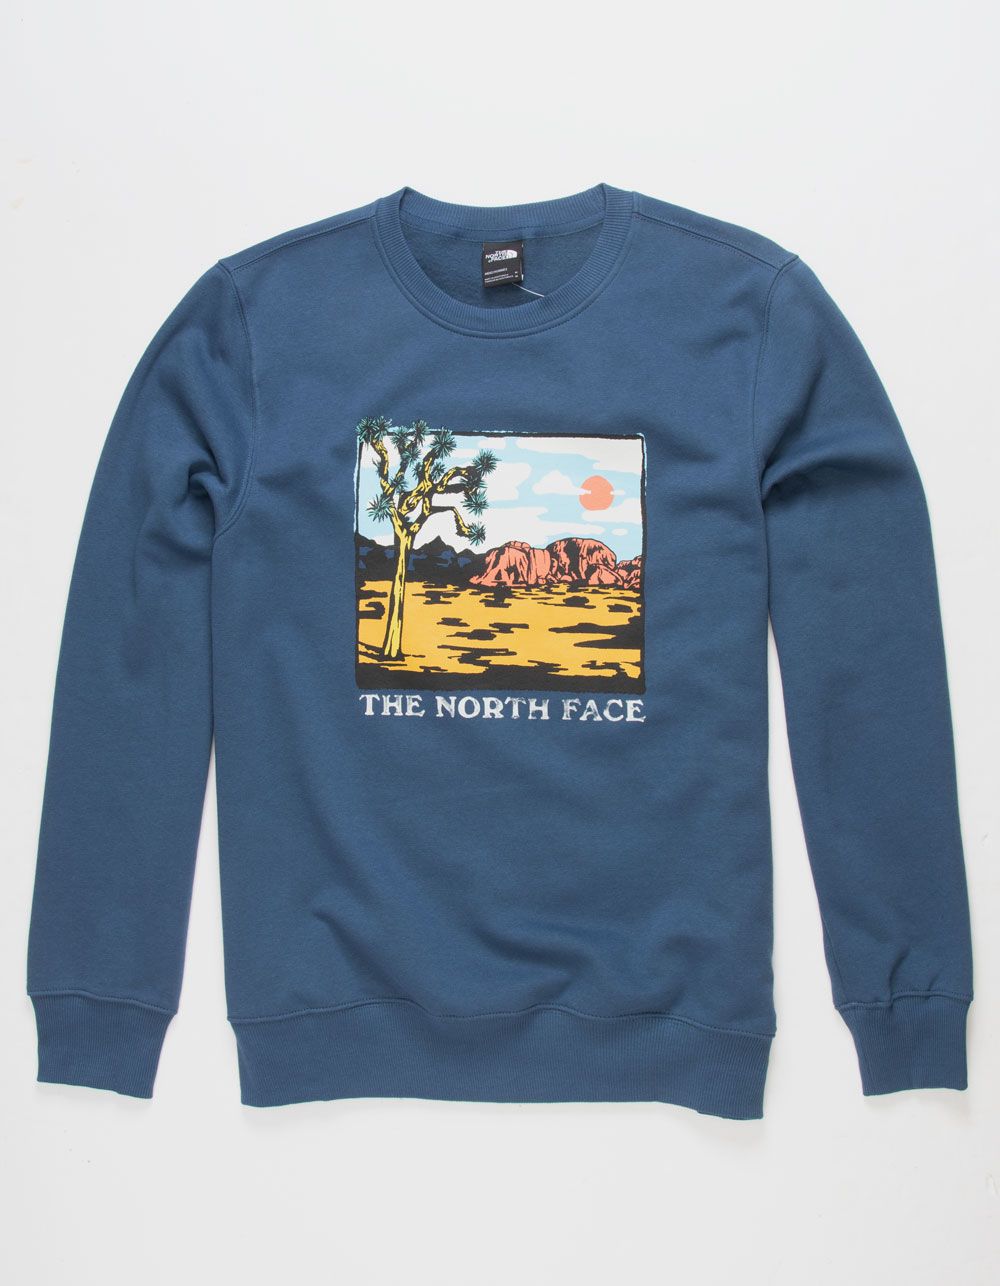 THE NORTH FACE Graphic Injection Mens Crew Neck Sweatshirt - NAVY | Tillys | Tillys